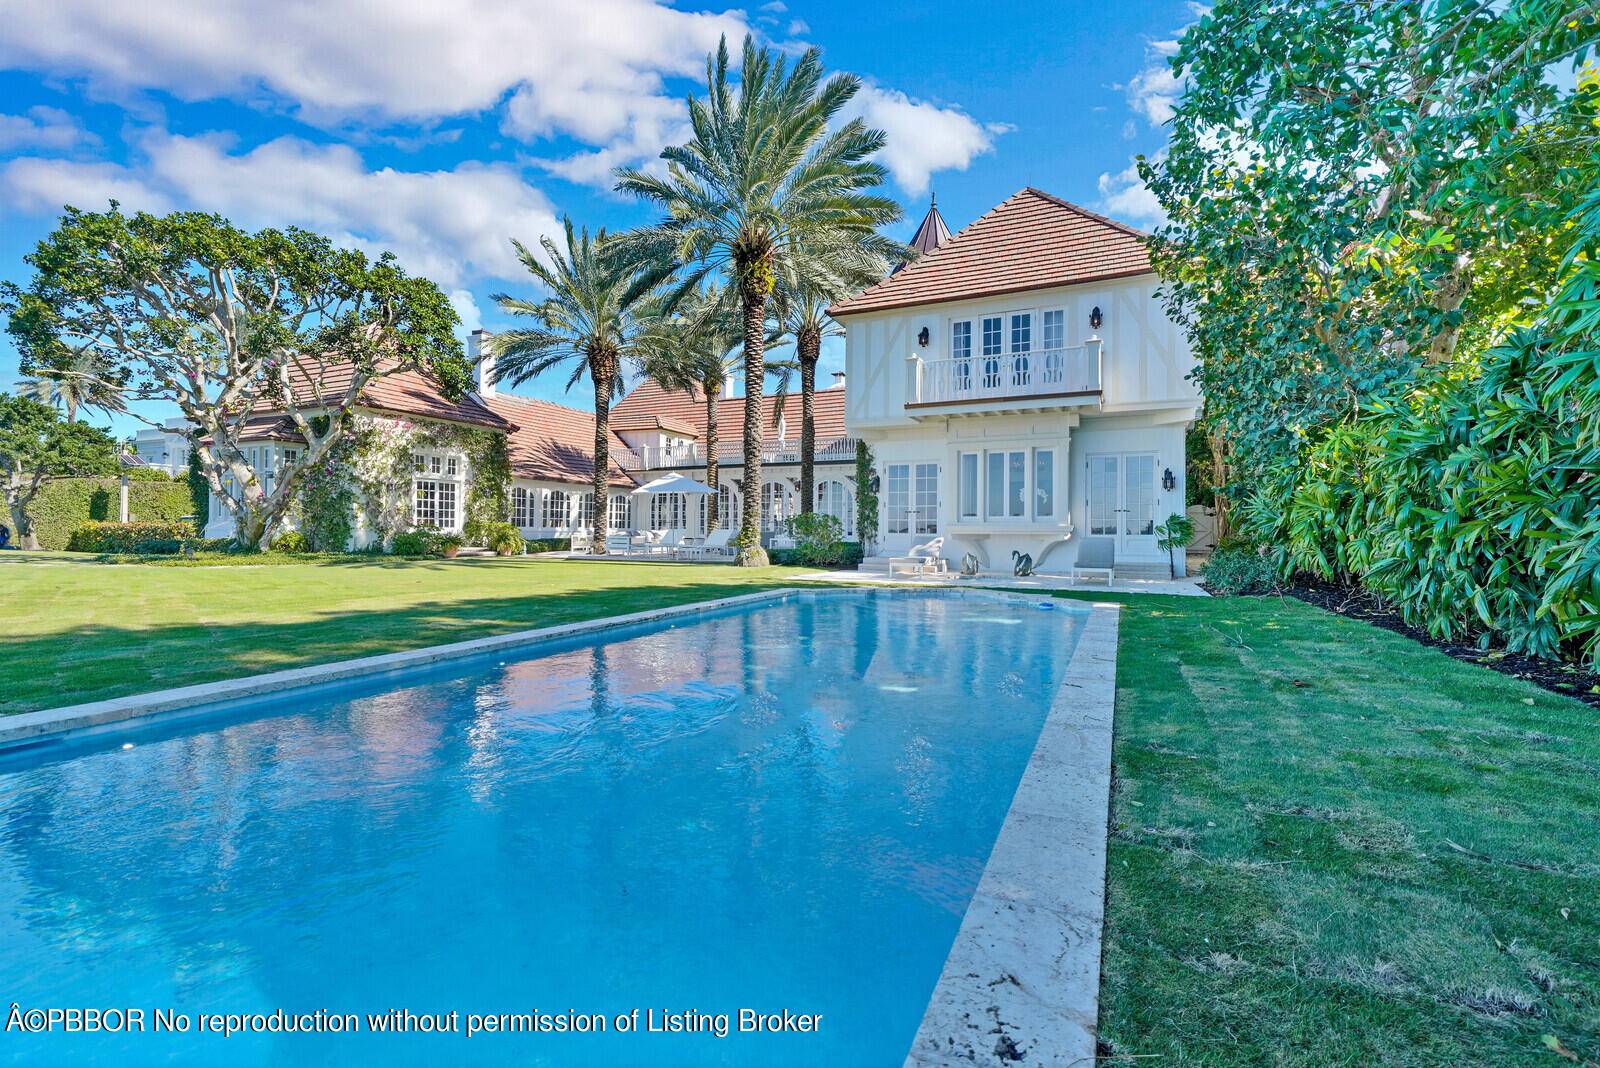 A remarkable storybook landmark estate with 150' of prime waterfront land.